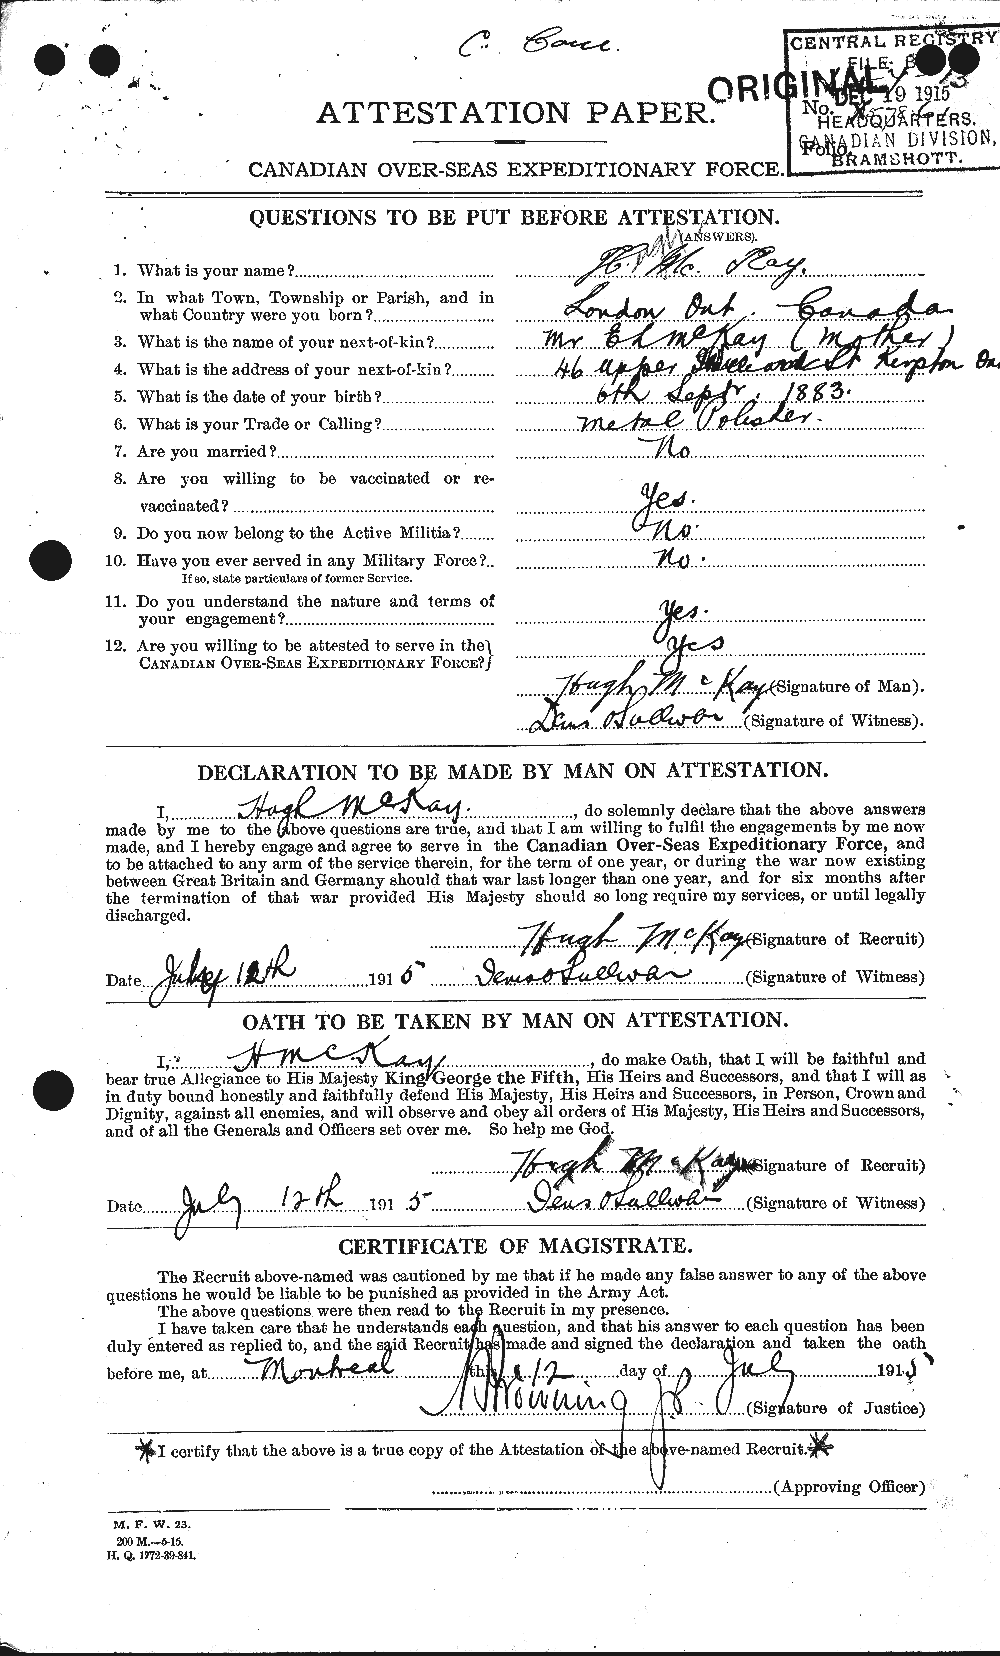 Personnel Records of the First World War - CEF 534763a